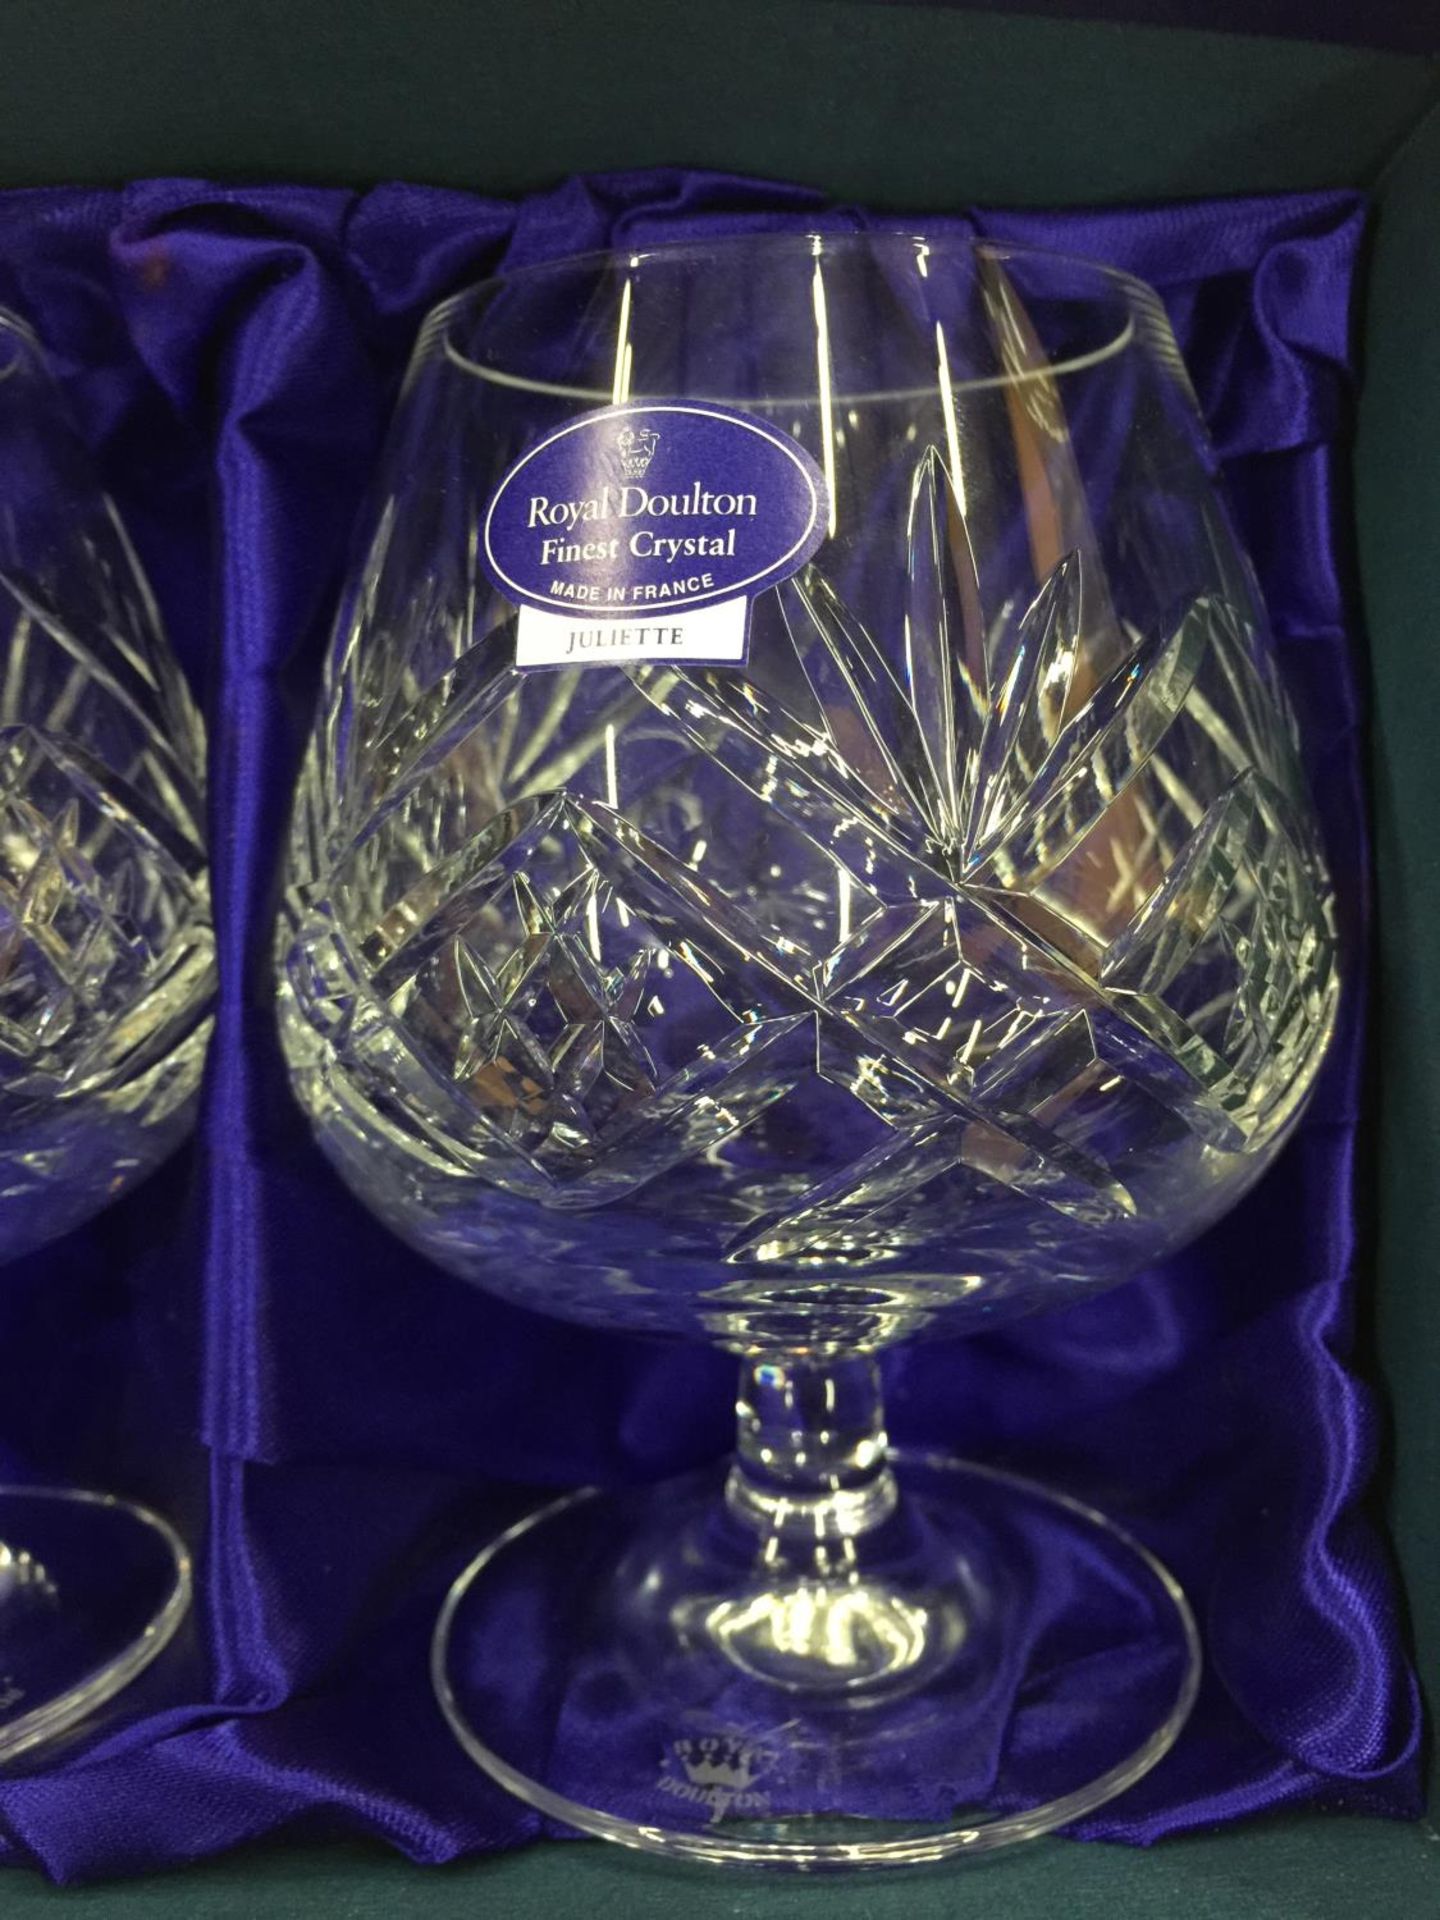 TWO PAIRS OF BOXED CRYSTAL GLASSES TO INCLUDE DOULTON JULLIETTE BRANDY AND BURNS WINE GLASSES - Image 2 of 3